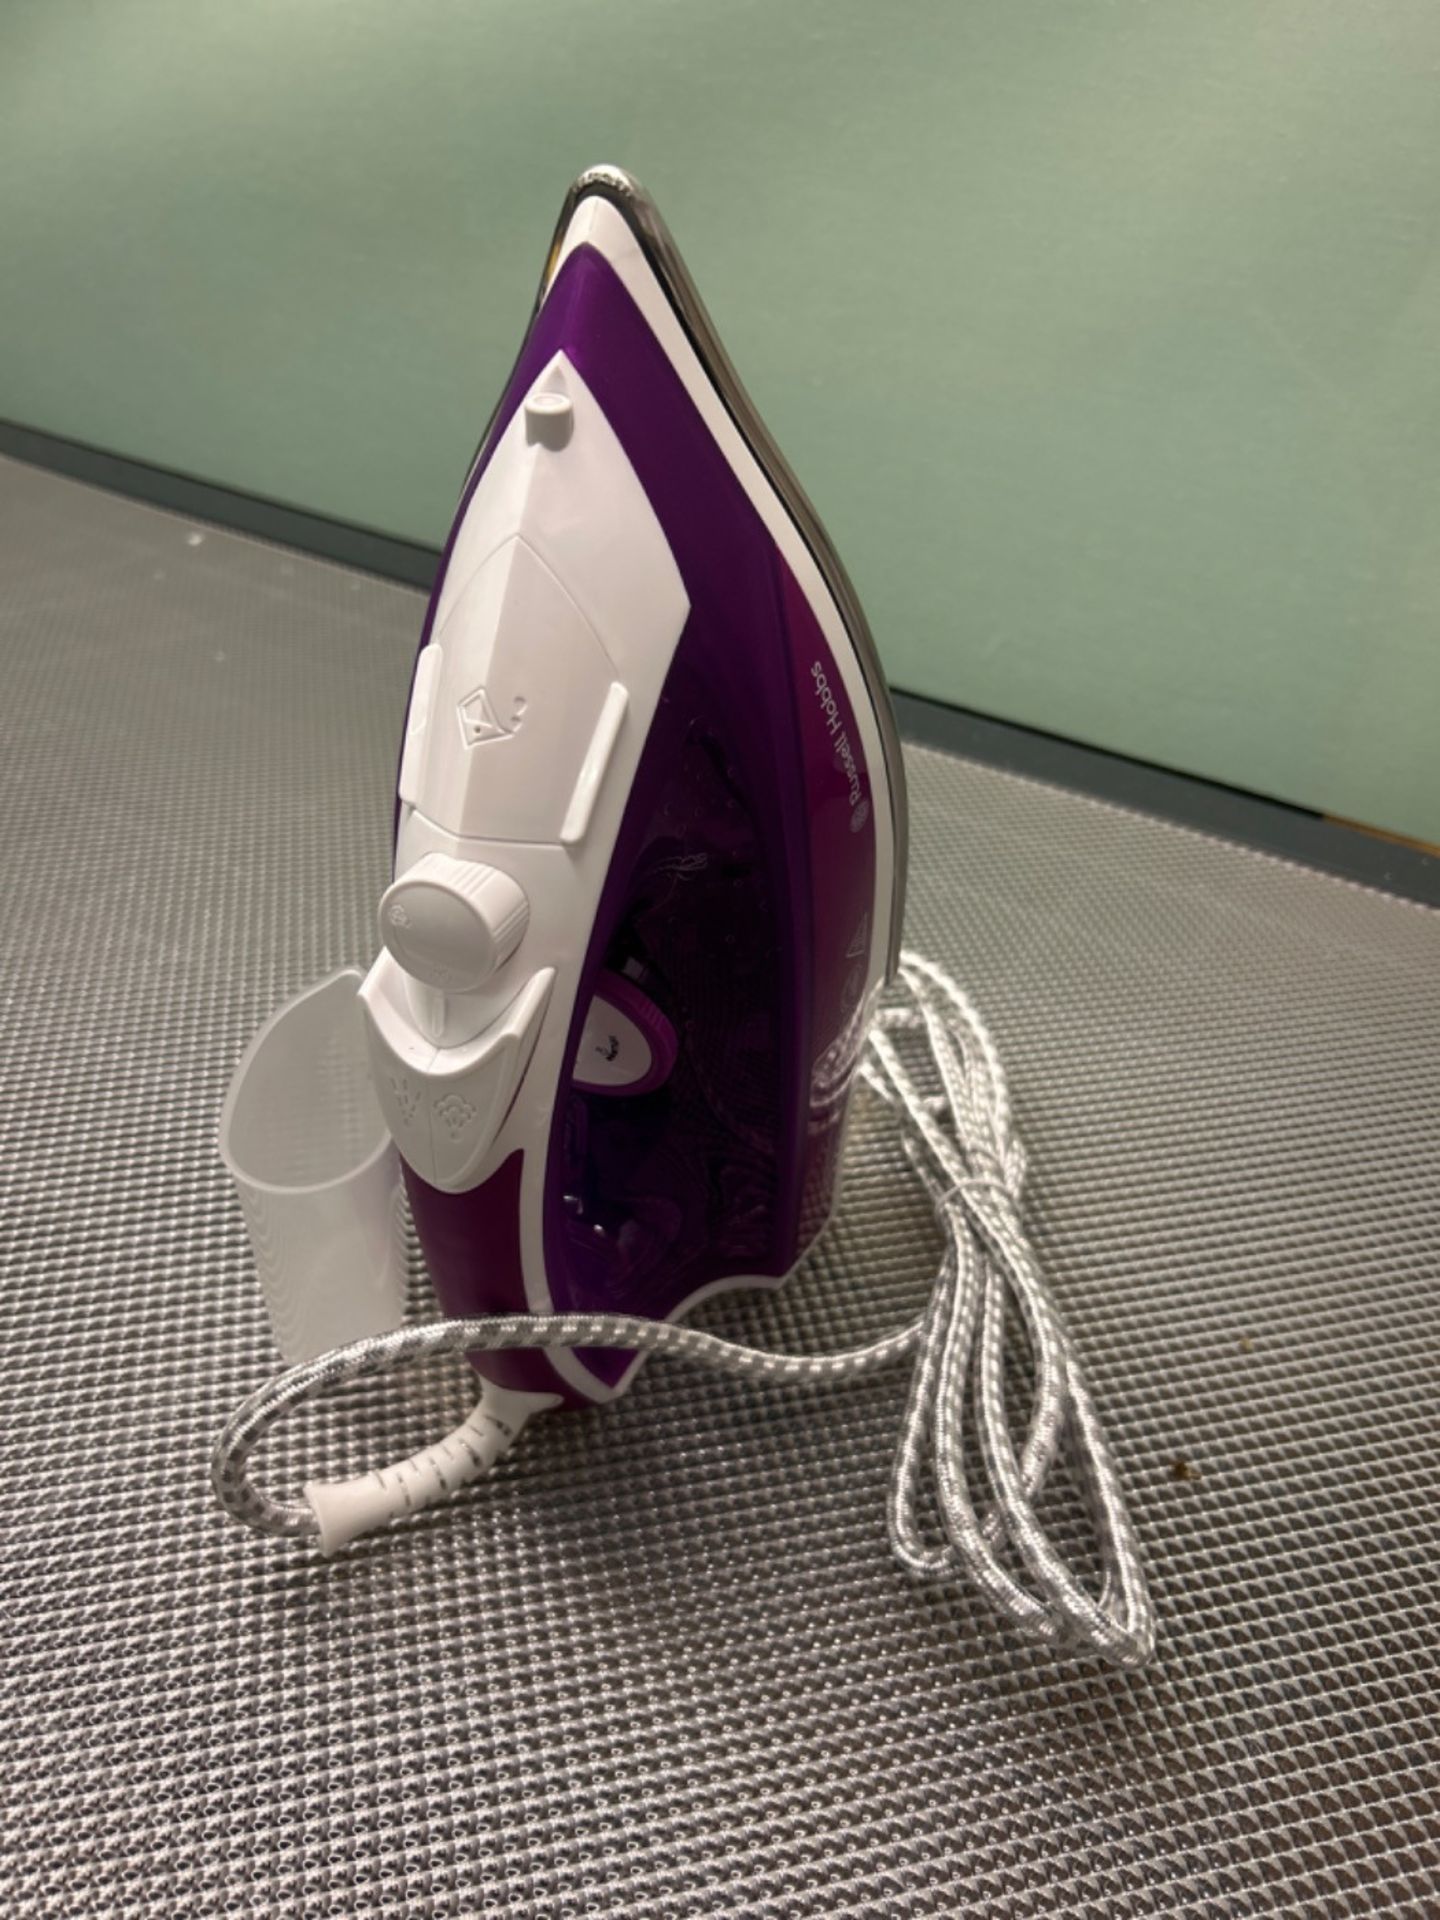 Russell Hobbs Supreme Steam Iron, Powerful Vertical Steam Function, Non-Stick Stainless Steel Sol... - Image 2 of 3